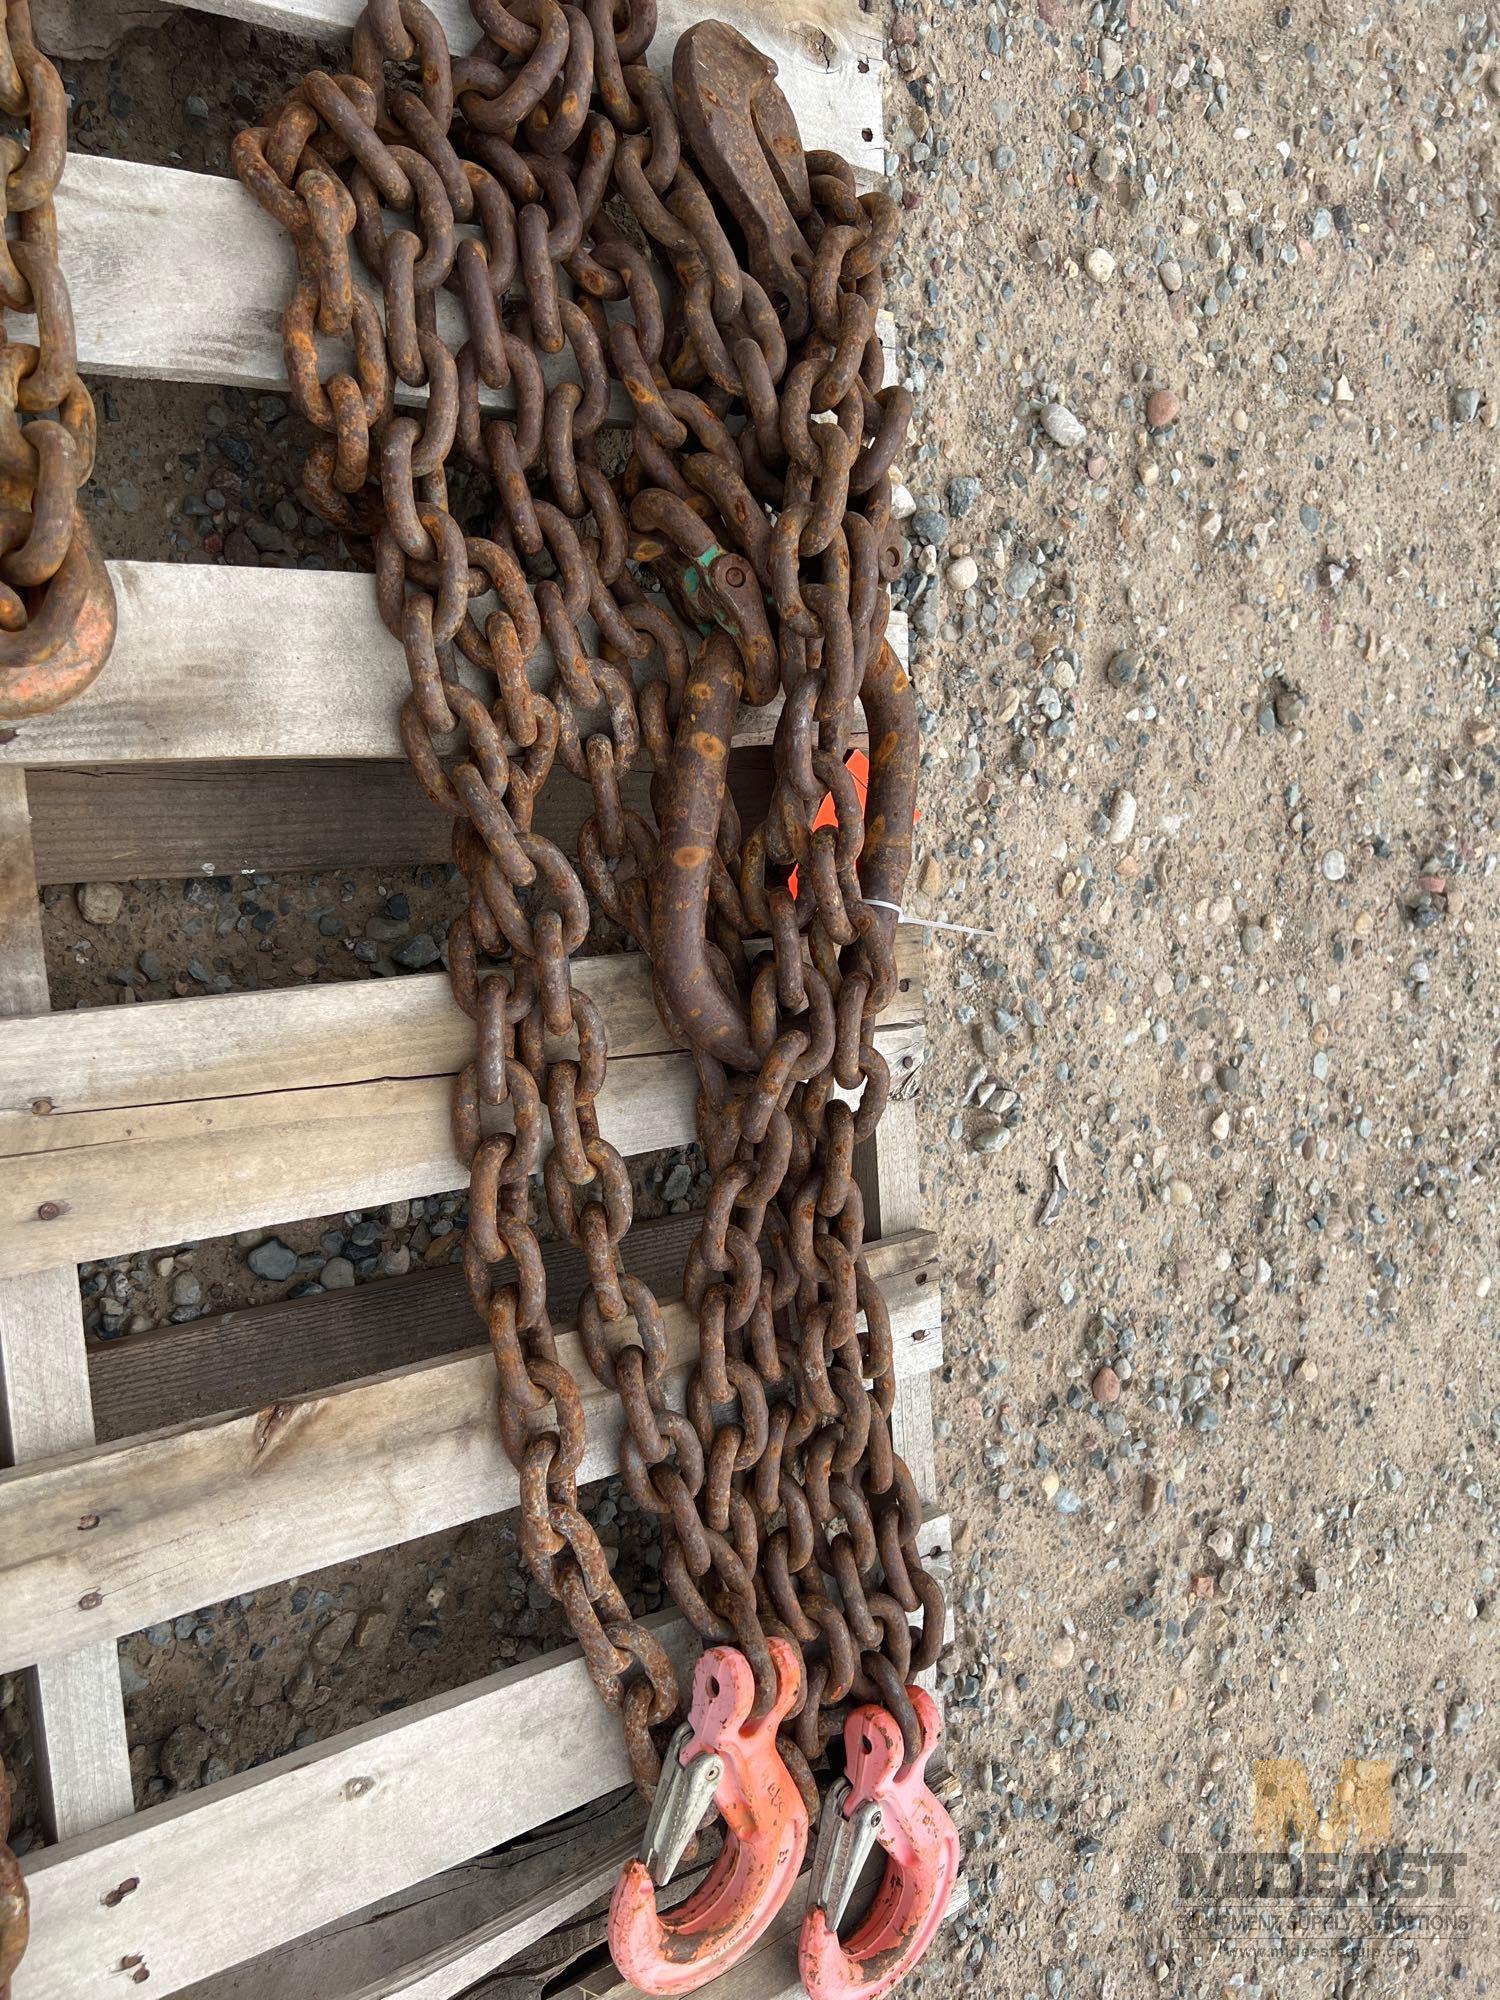 2-Leg Lifting Bridle Approx 10' Long With 3/8" Chain and Clevises